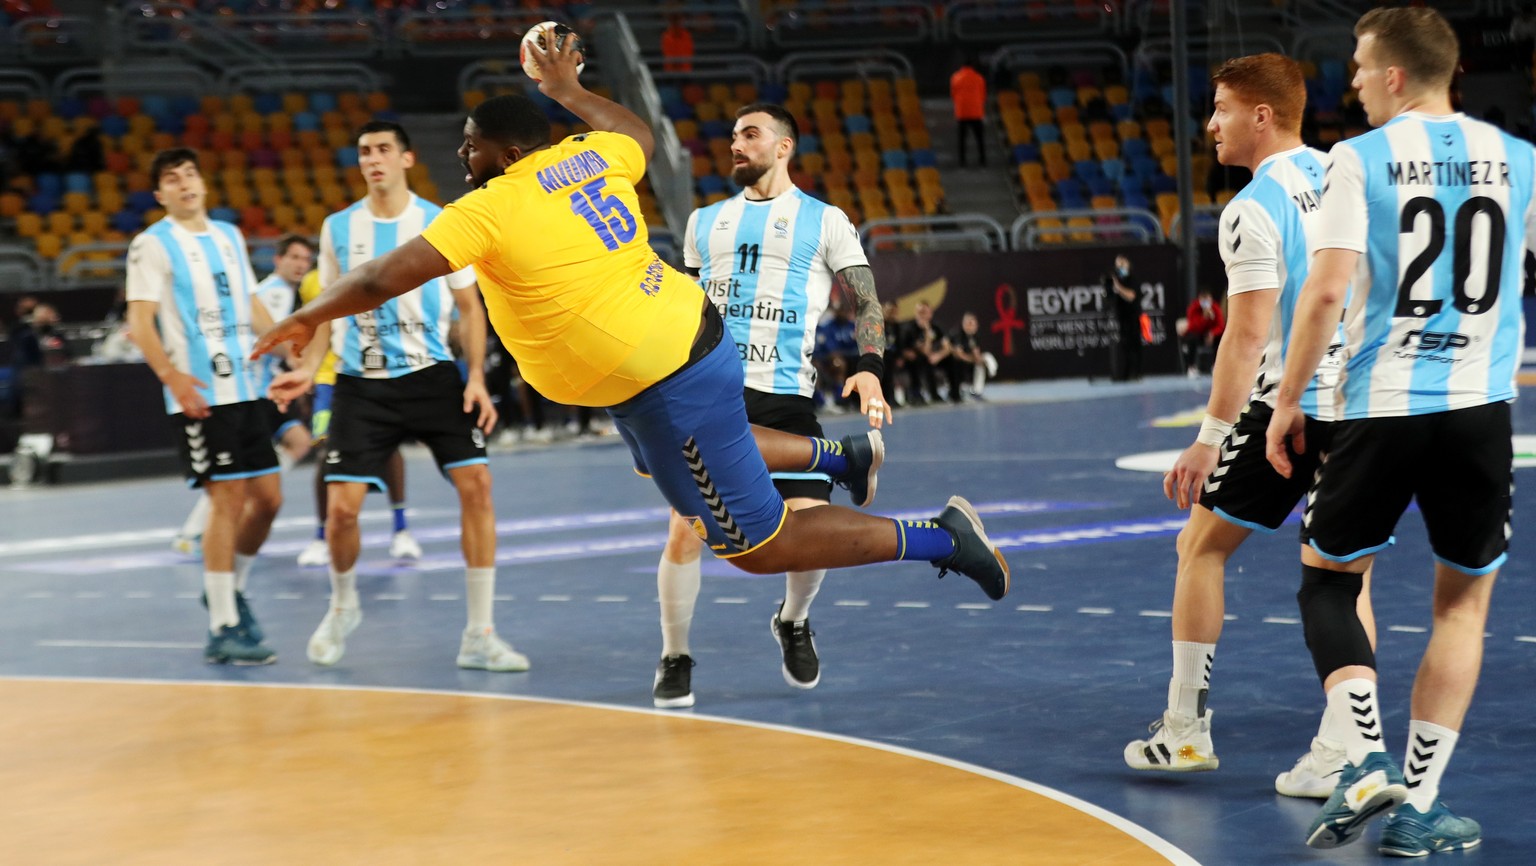 epa08939665 Gauthier Mvumbi Thierry (C) of Congo attempts to score during the match between Argentina and D.R. Congo at the 27th Men&#039;s Handball World Championship in Cairo, Egypt, 15 January 2021 ...